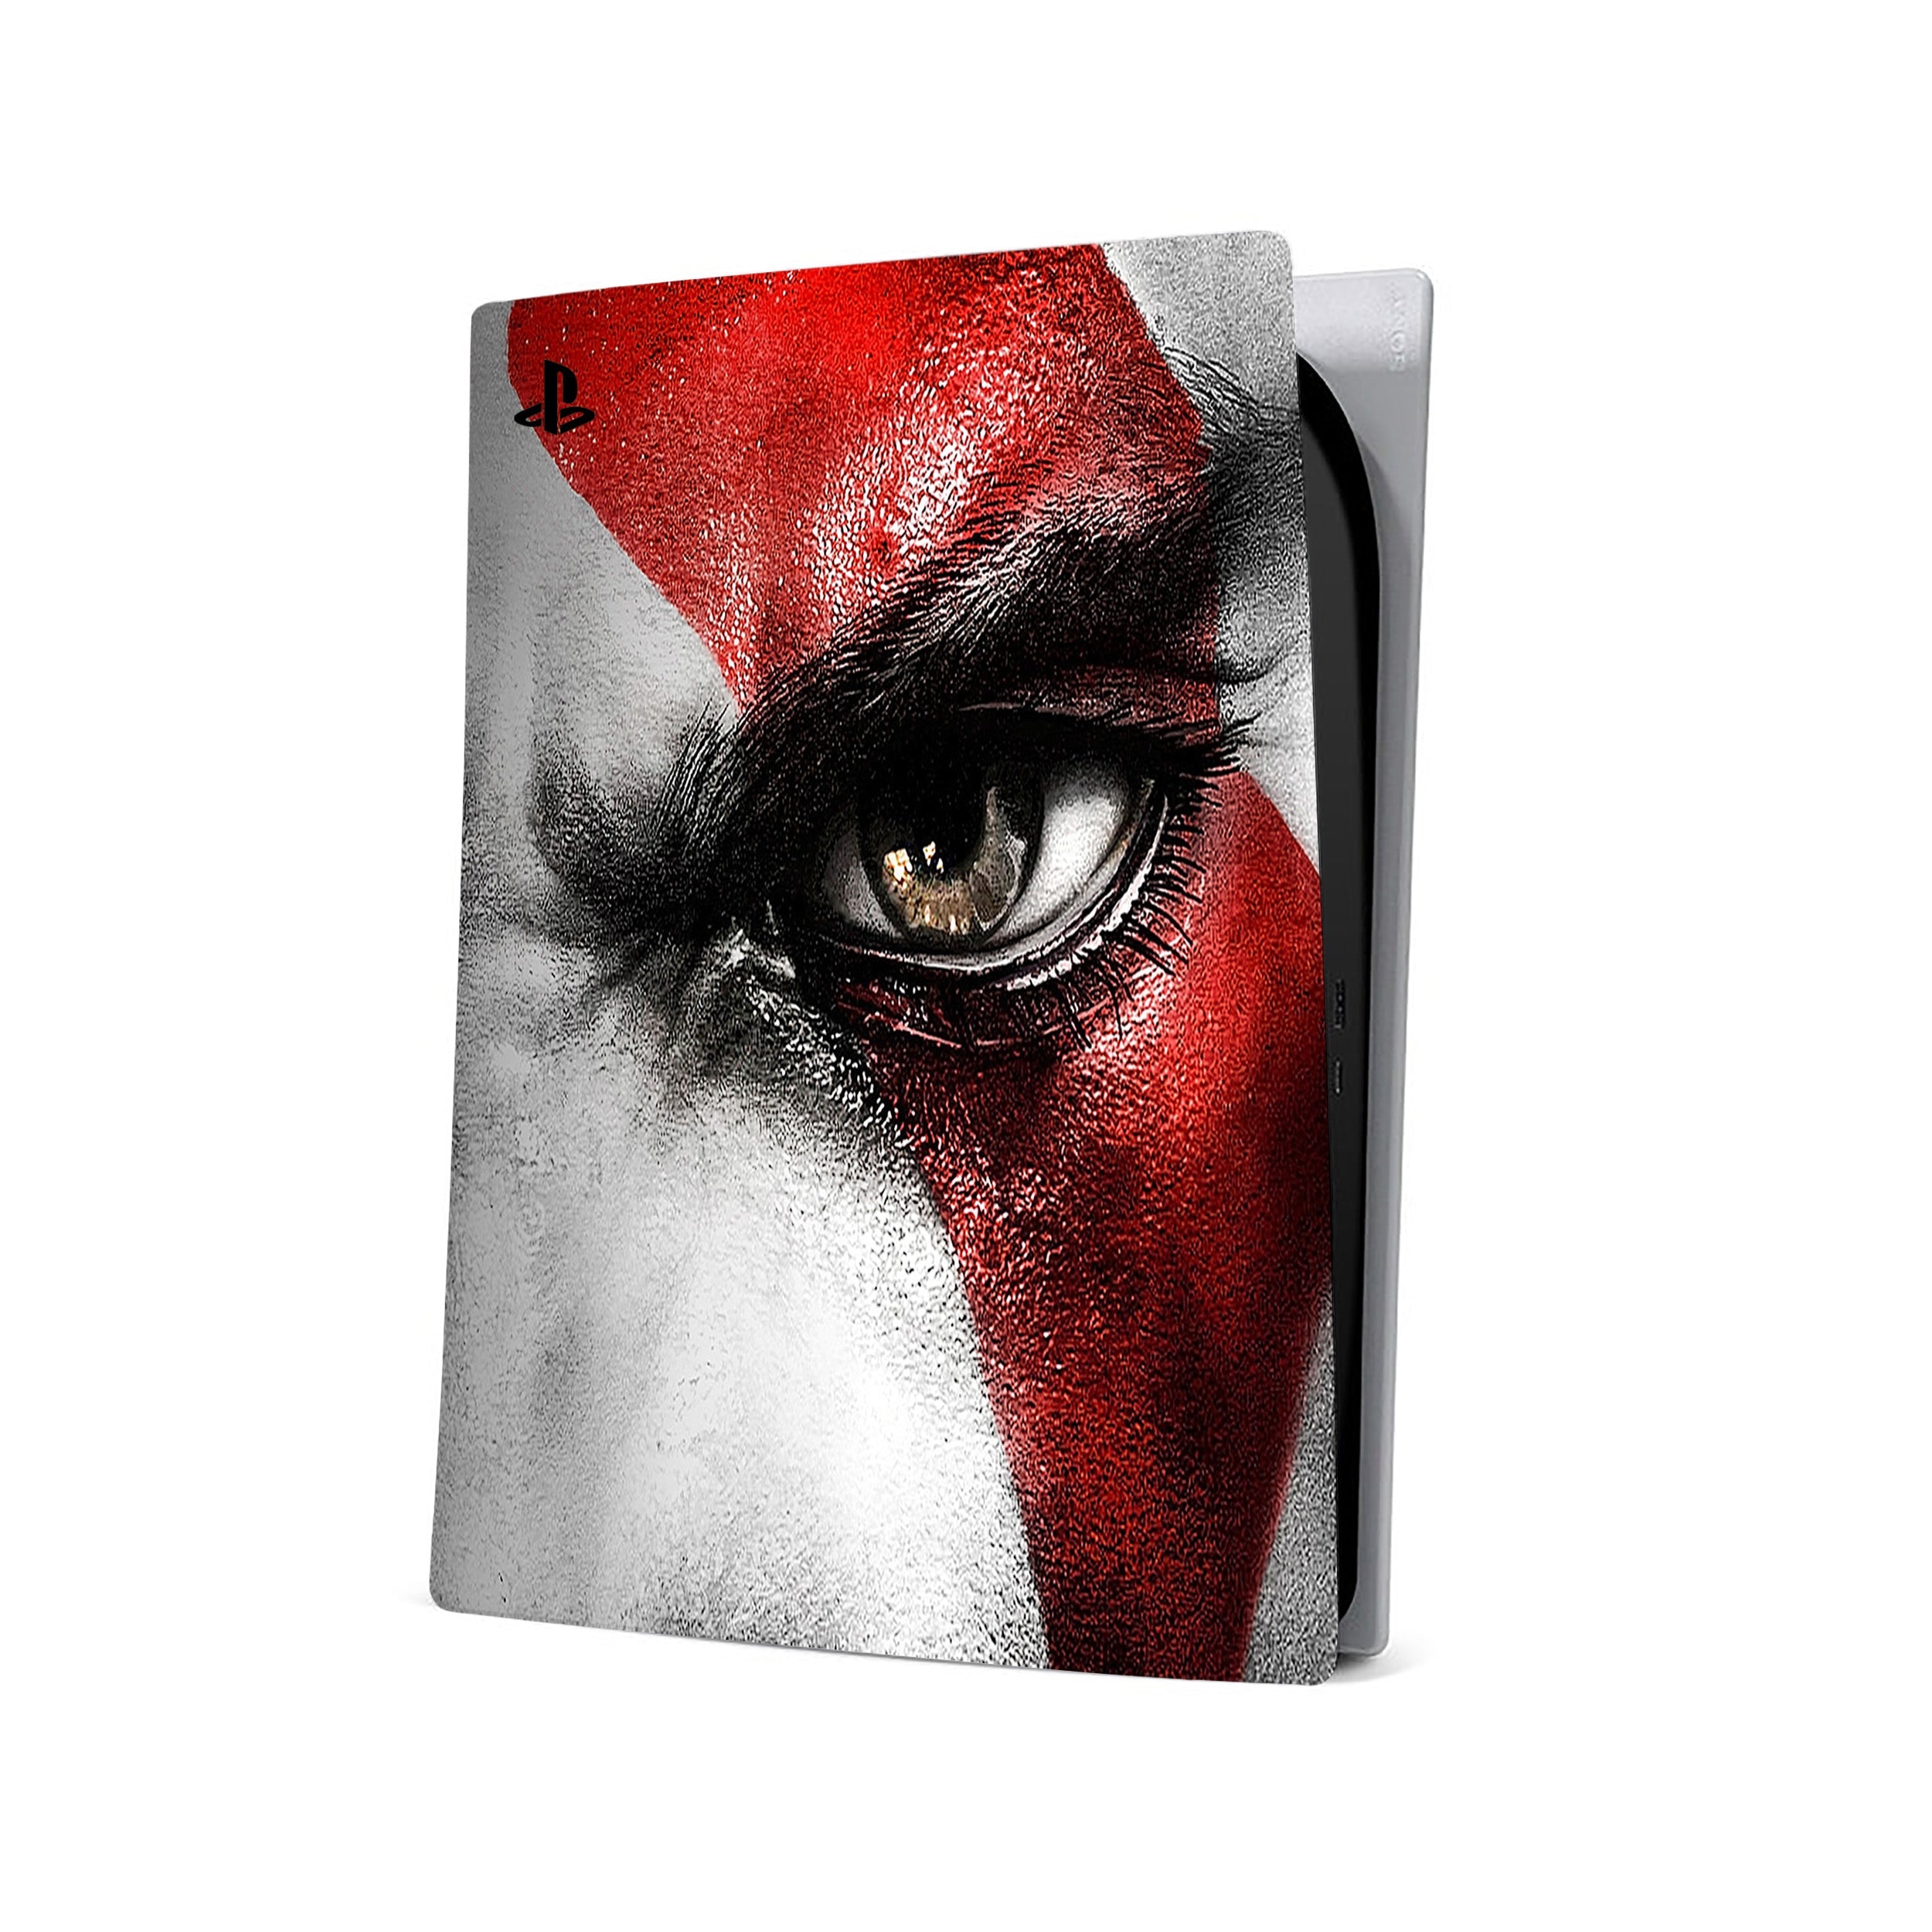 A video game skin featuring a God Of War Kratos design for the PS5.